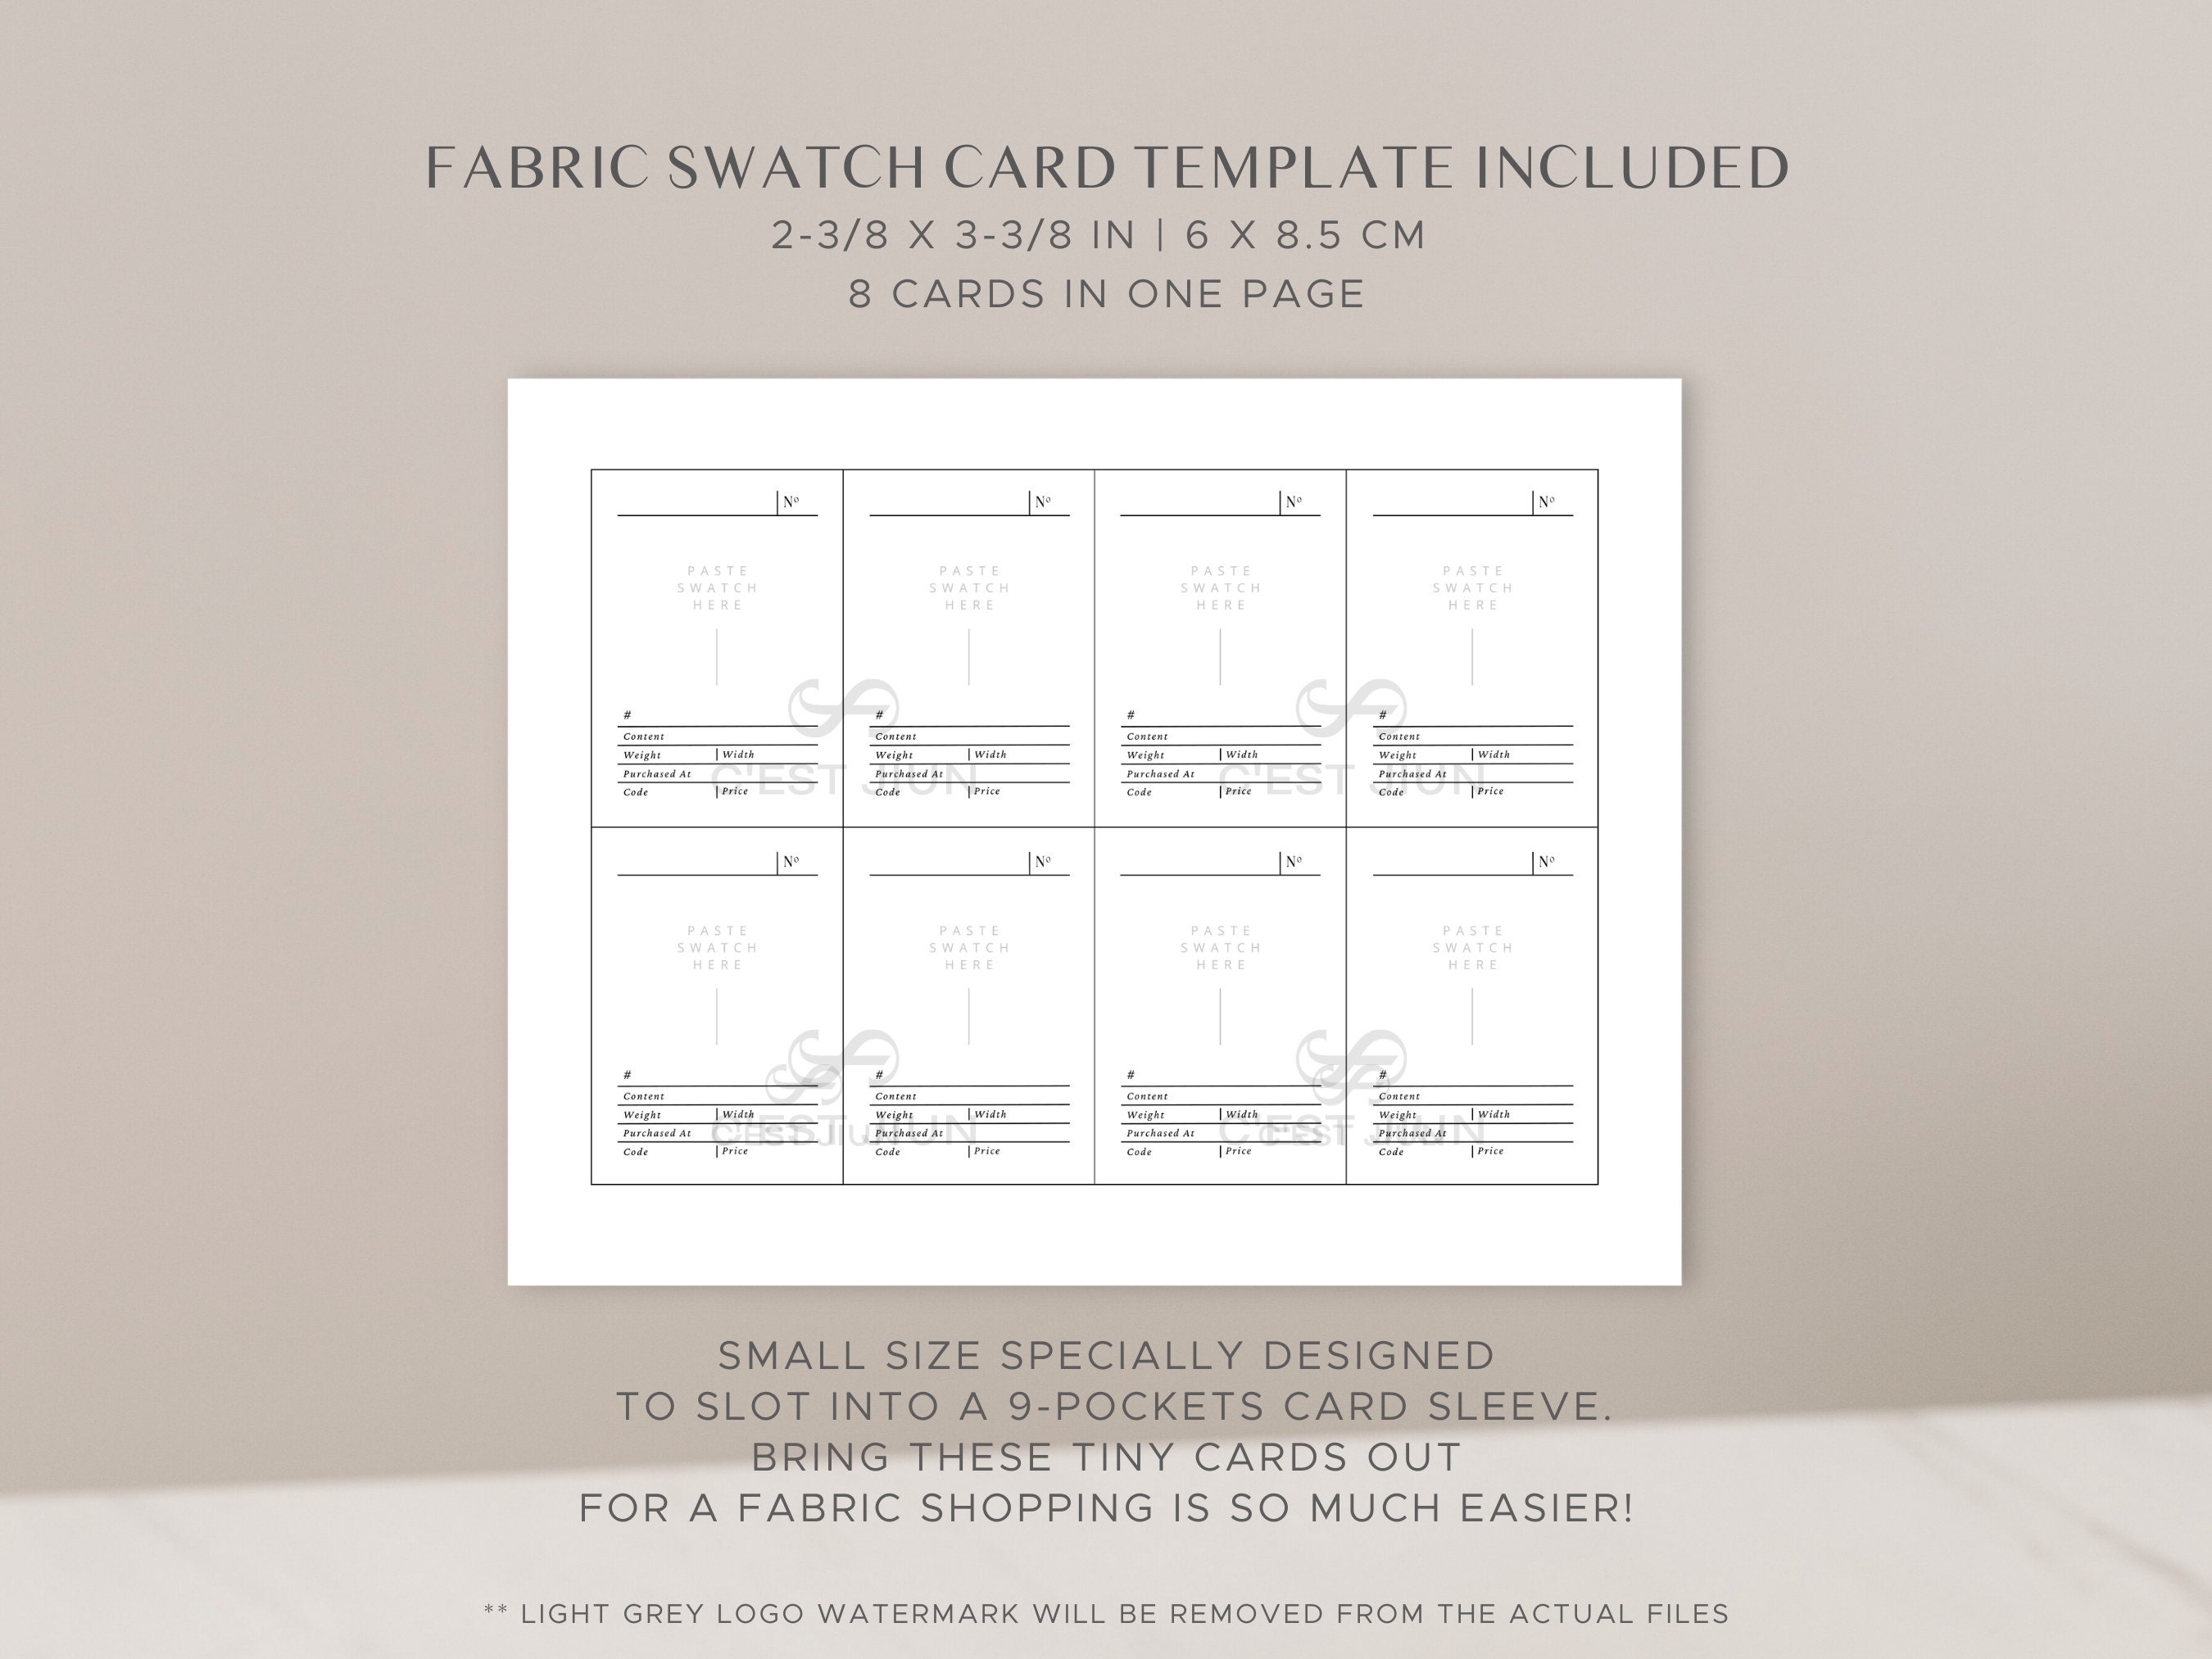 5 Steps to Make a Cute Fabric Swatch - Free Printable